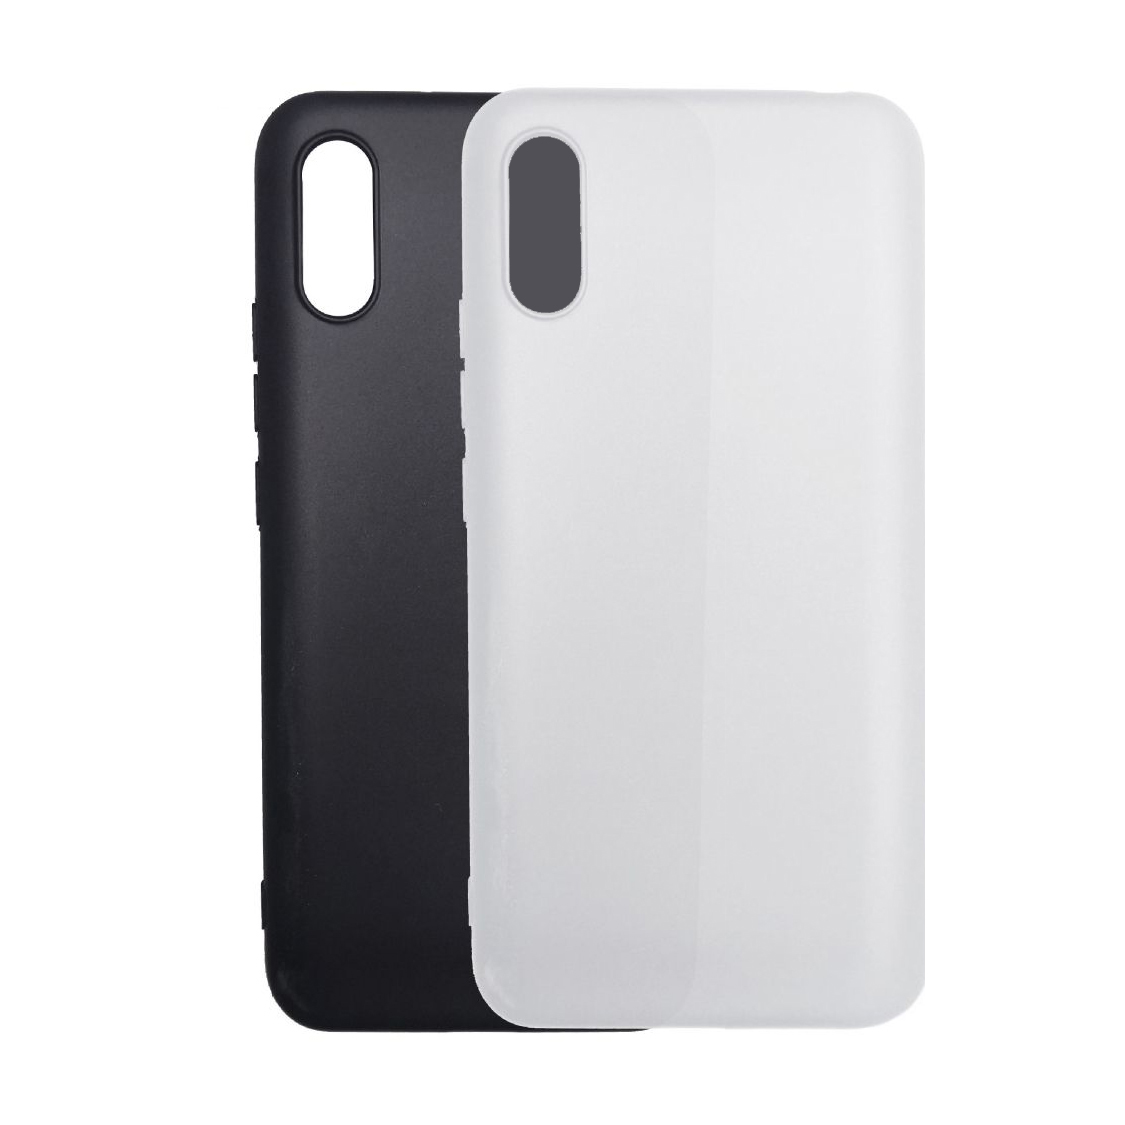 Bakeey-Pudding-Frosted-Shockproof-Ultra-thin-Non-yellow-Soft-TPU-Protective-Case-for-Xiaomi-Redmi-9A-1716764-1